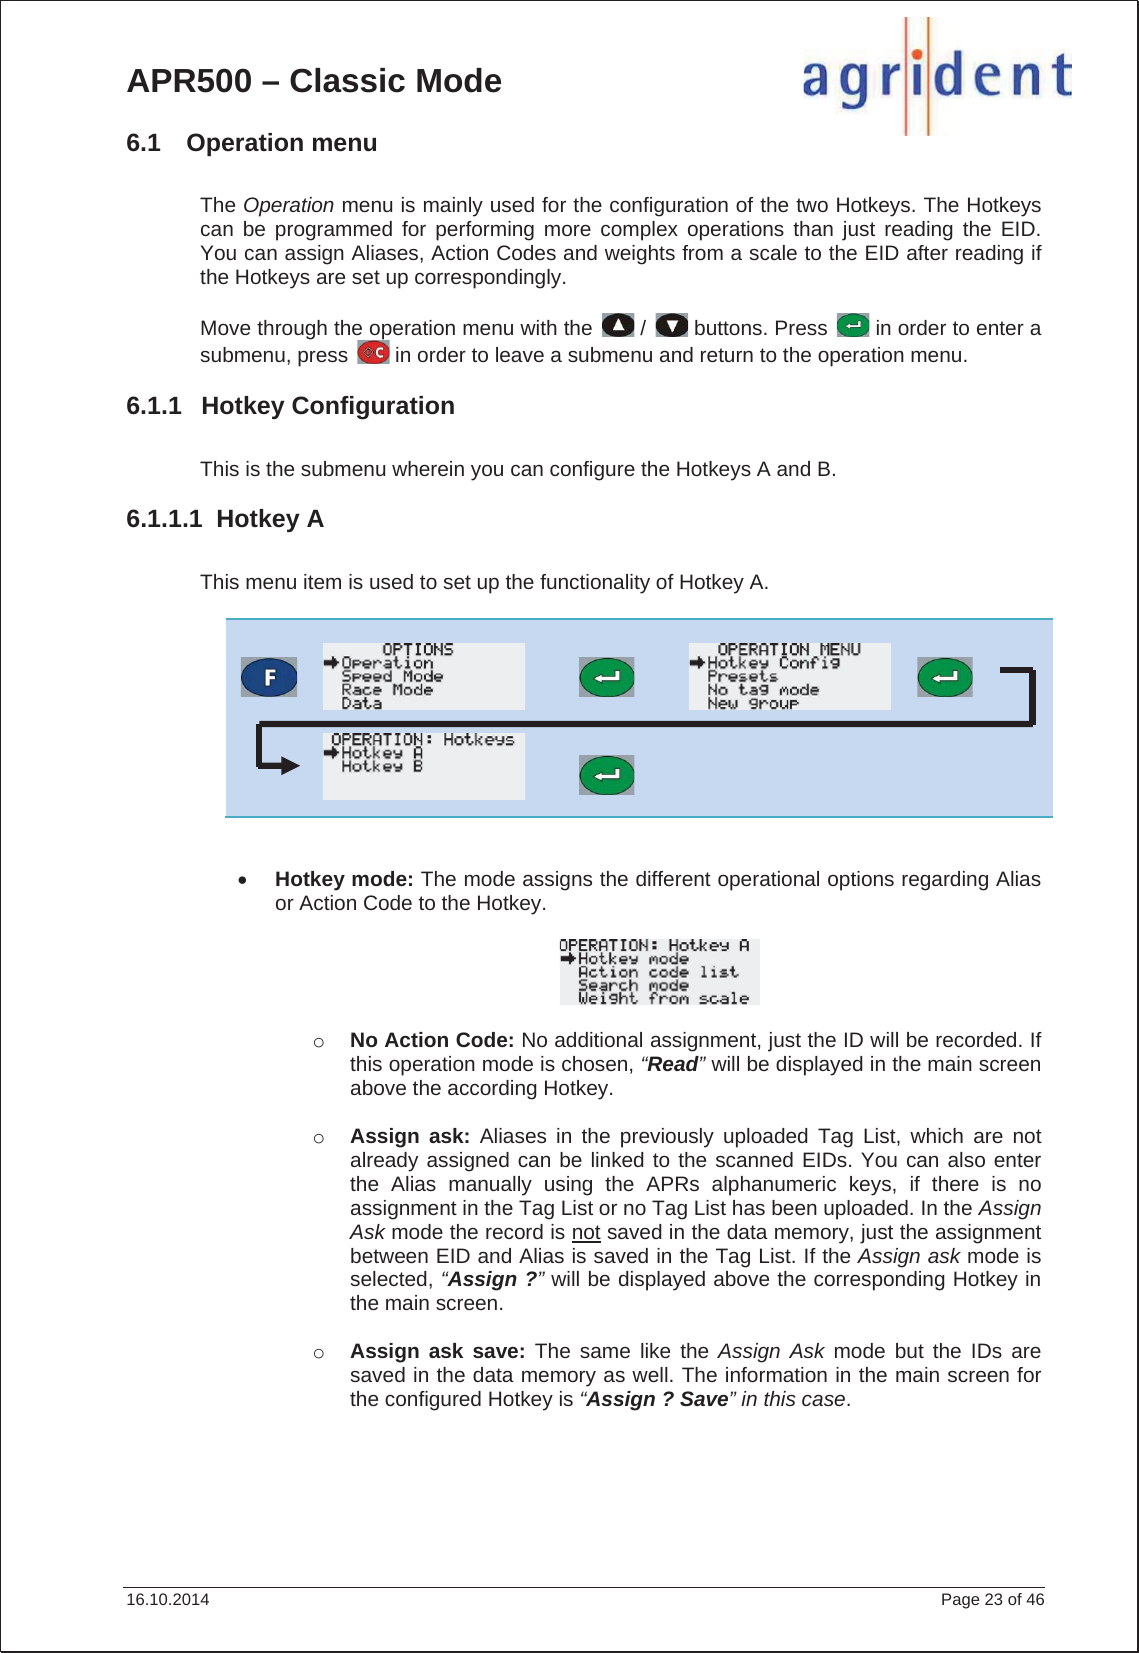 APR500 – Classic Mode 16.10.2014    Page 23 of 46 6.1 Operation menu The Operation menu is mainly used for the configuration of the two Hotkeys. The Hotkeys can be programmed for performing more complex operations than just reading the EID. You can assign Aliases, Action Codes and weights from a scale to the EID after reading if the Hotkeys are set up correspondingly. Move through the operation menu with the   /   buttons. Press   in order to enter a submenu, press   in order to leave a submenu and return to the operation menu. 6.1.1 Hotkey Configuration This is the submenu wherein you can configure the Hotkeys A and B. 6.1.1.1 Hotkey A This menu item is used to set up the functionality of Hotkey A.  xHotkey mode: The mode assigns the different operational options regarding Alias or Action Code to the Hotkey. oNo Action Code: No additional assignment, just the ID will be recorded. If this operation mode is chosen, “Read” will be displayed in the main screen above the according Hotkey. oAssign ask: Aliases in the previously uploaded Tag List, which are not already assigned can be linked to the scanned EIDs. You can also enter the Alias manually using the APRs alphanumeric keys, if there is no assignment in the Tag List or no Tag List has been uploaded. In the Assign Ask mode the record is not saved in the data memory, just the assignment between EID and Alias is saved in the Tag List. If the Assign ask mode is selected, “Assign ?”will be displayed above the corresponding Hotkey in the main screen. oAssign ask save: The same like the Assign Ask mode but the IDs are saved in the data memory as well. The information in the main screen for the configured Hotkey is “Assign ? Save” in this case.